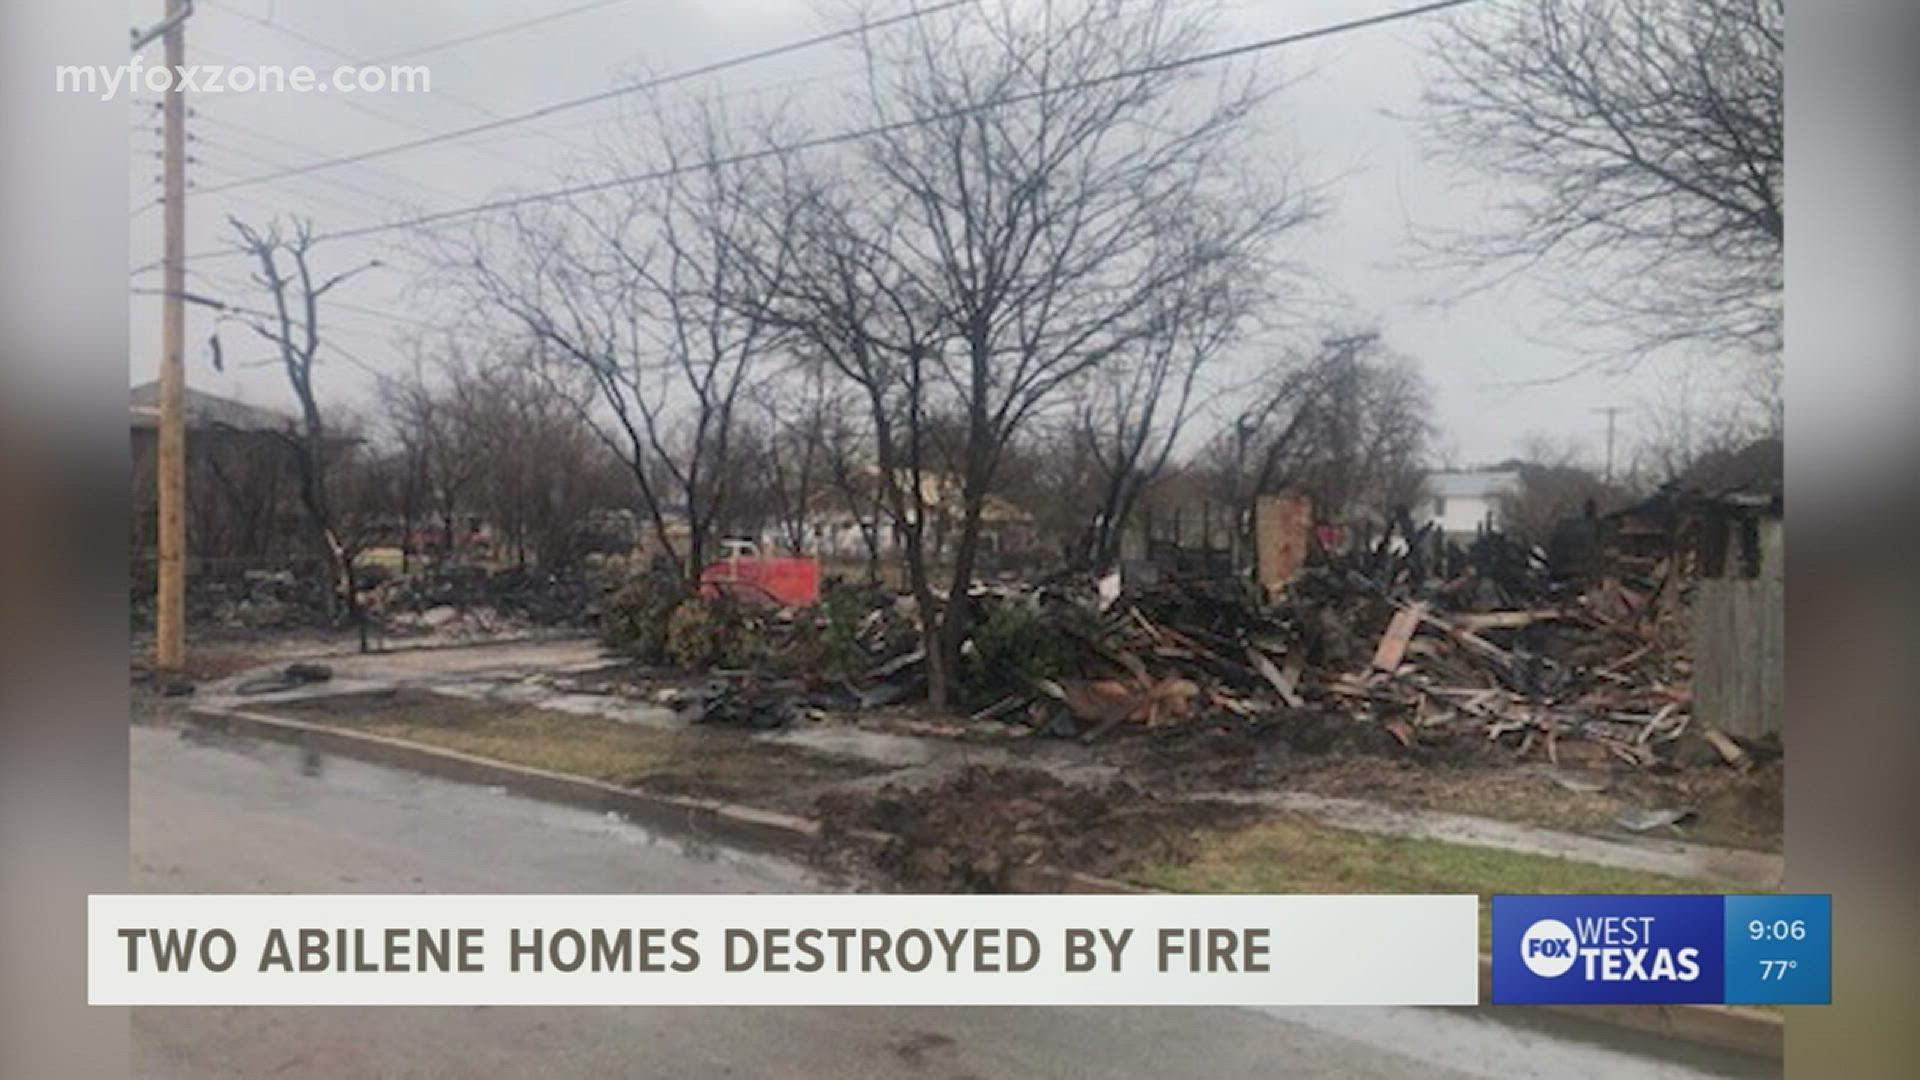 Two homes were destroyed by fire Sunday in Abilene. A third home was damaged, according to the AFD.